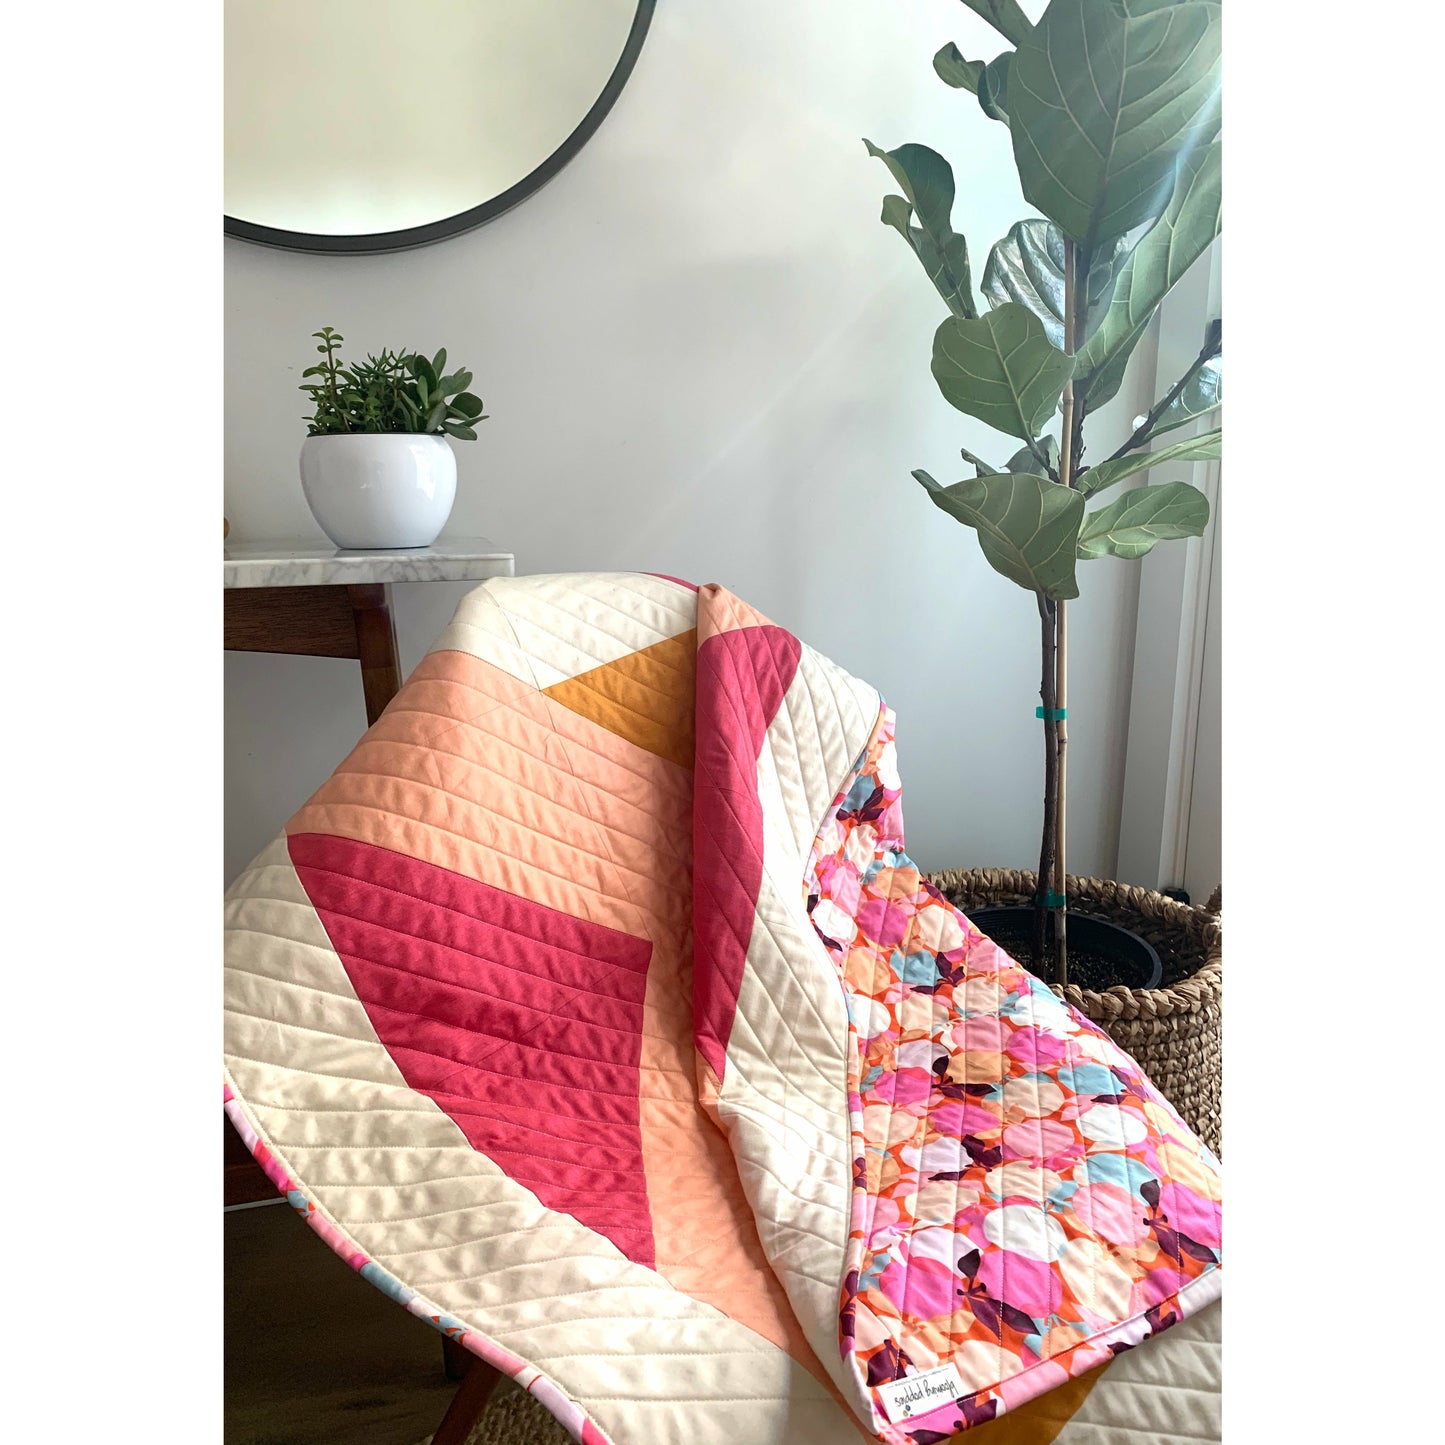 Handmade Quilt- Small Lap or Baby Size, High Quality Cottons